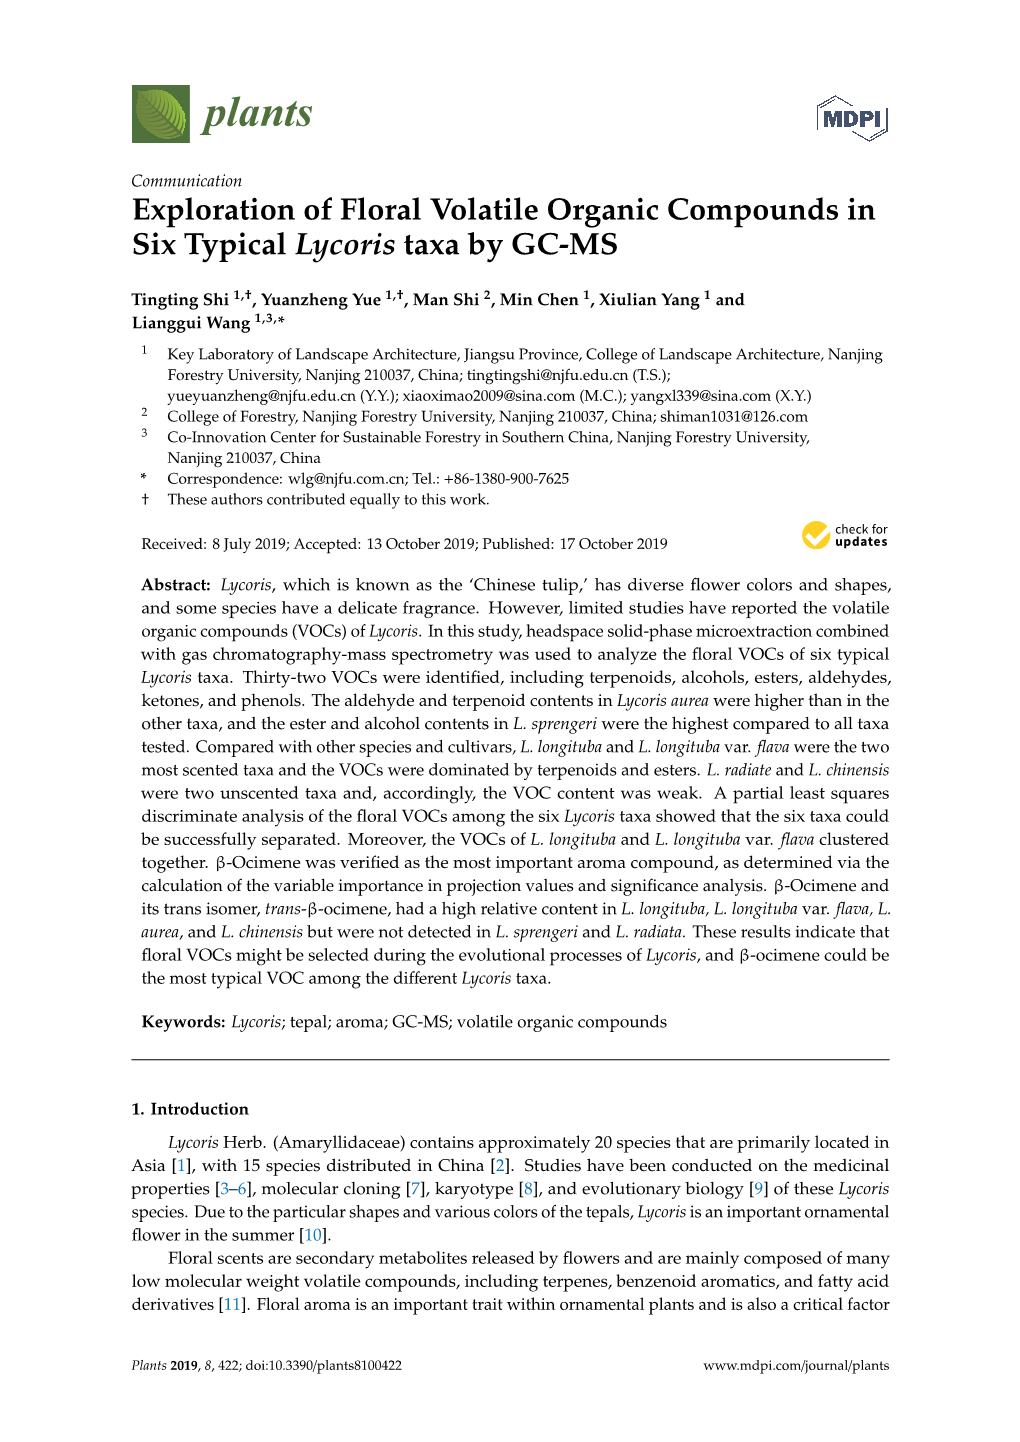 Exploration of Floral Volatile Organic Compounds in Six Typical Lycoris Taxa by GC-MS